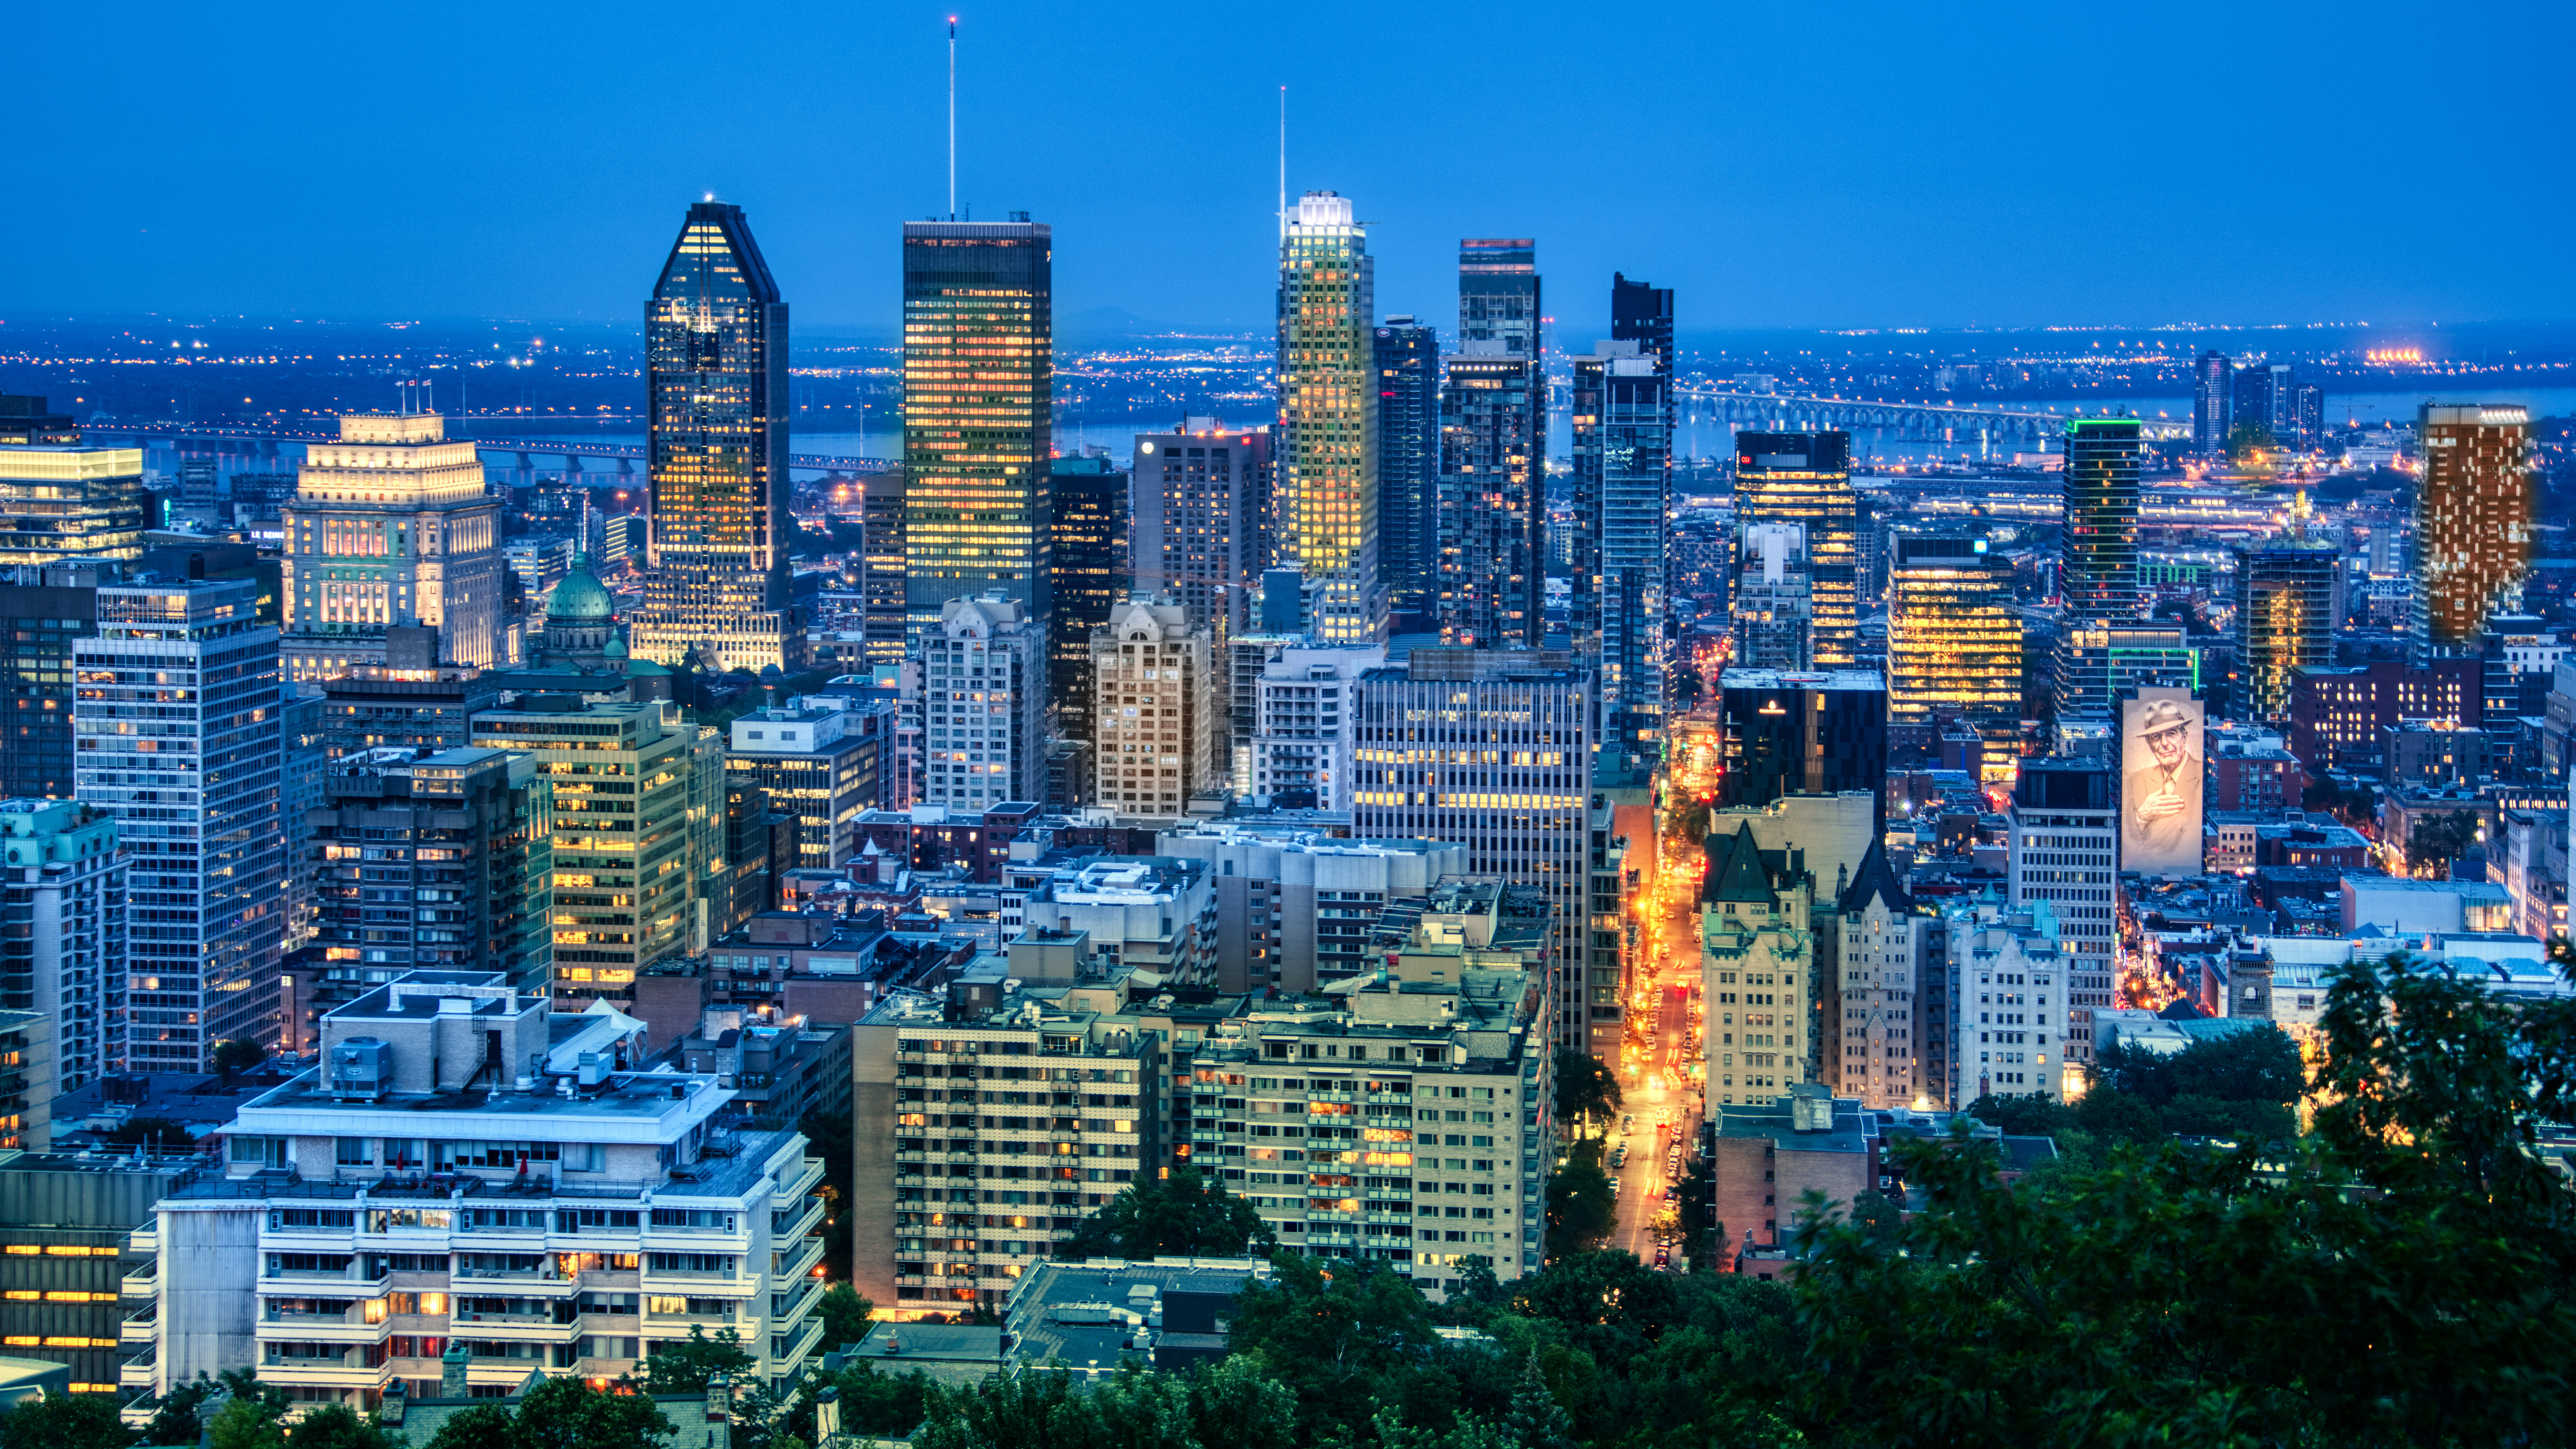 General 7680x4320 Trey Ratcliff photography city building lights Montreal